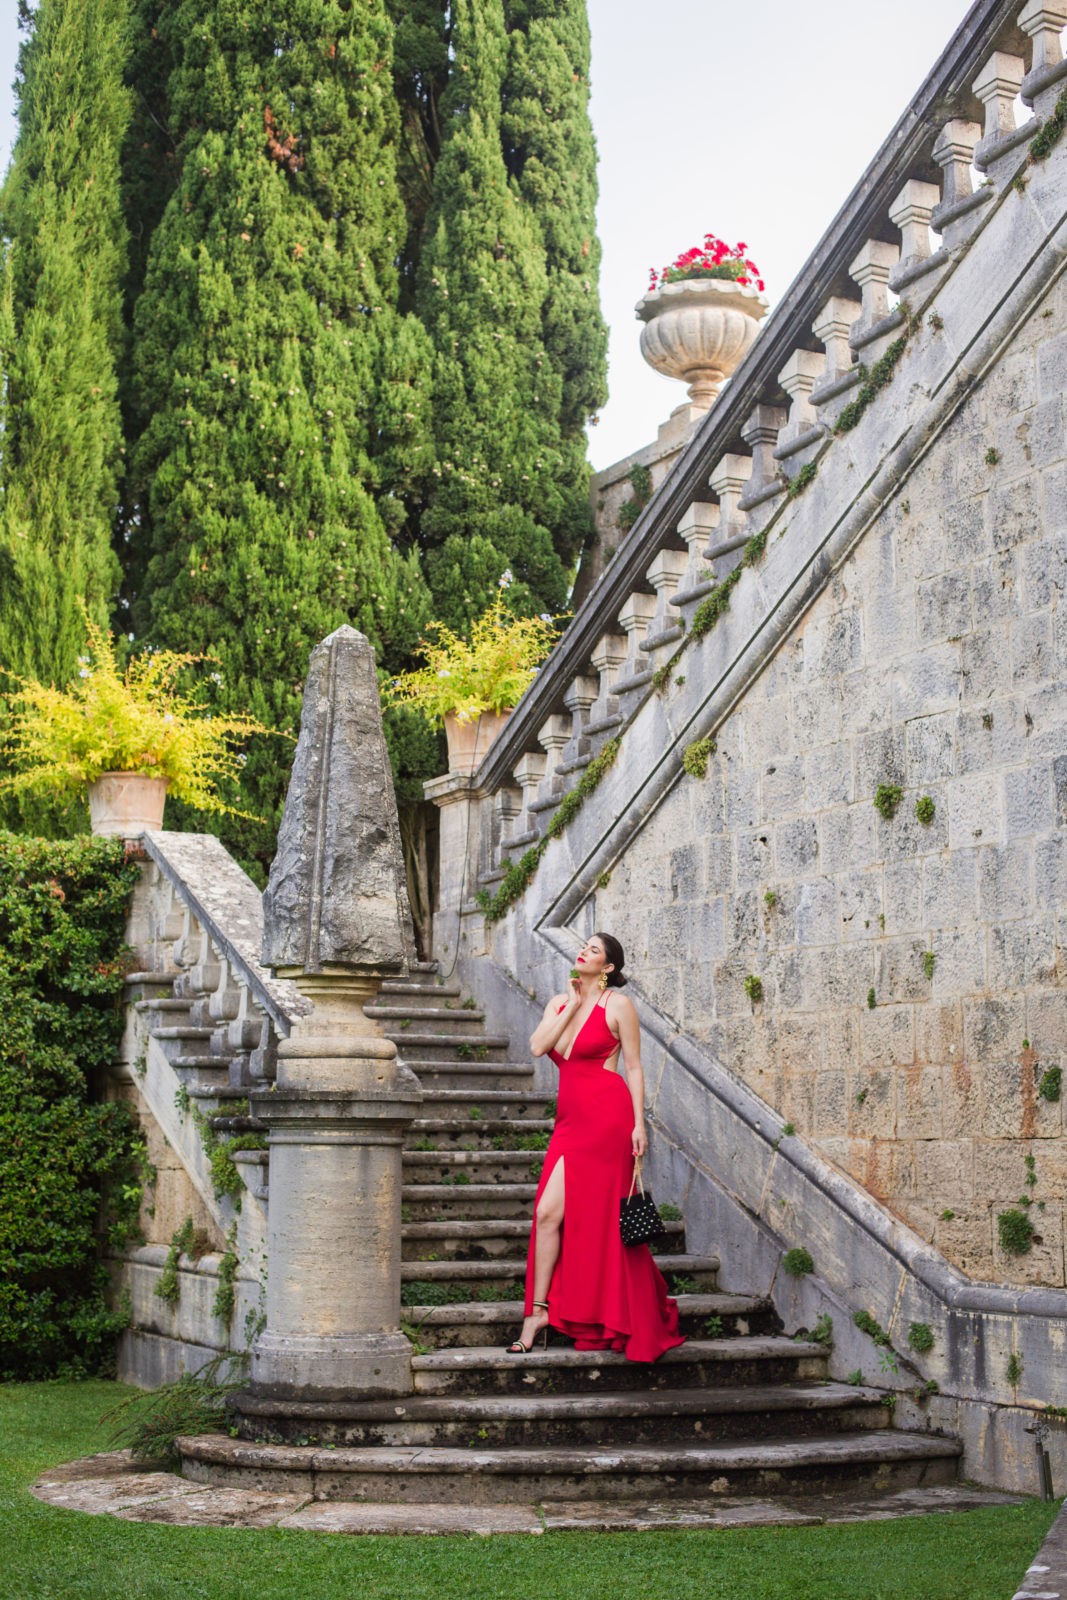 La Foce by Fashion Blogger Laura Lily, - La Foce Gardens in Italy featured by top Los Angeles travel blog, Laura LIly